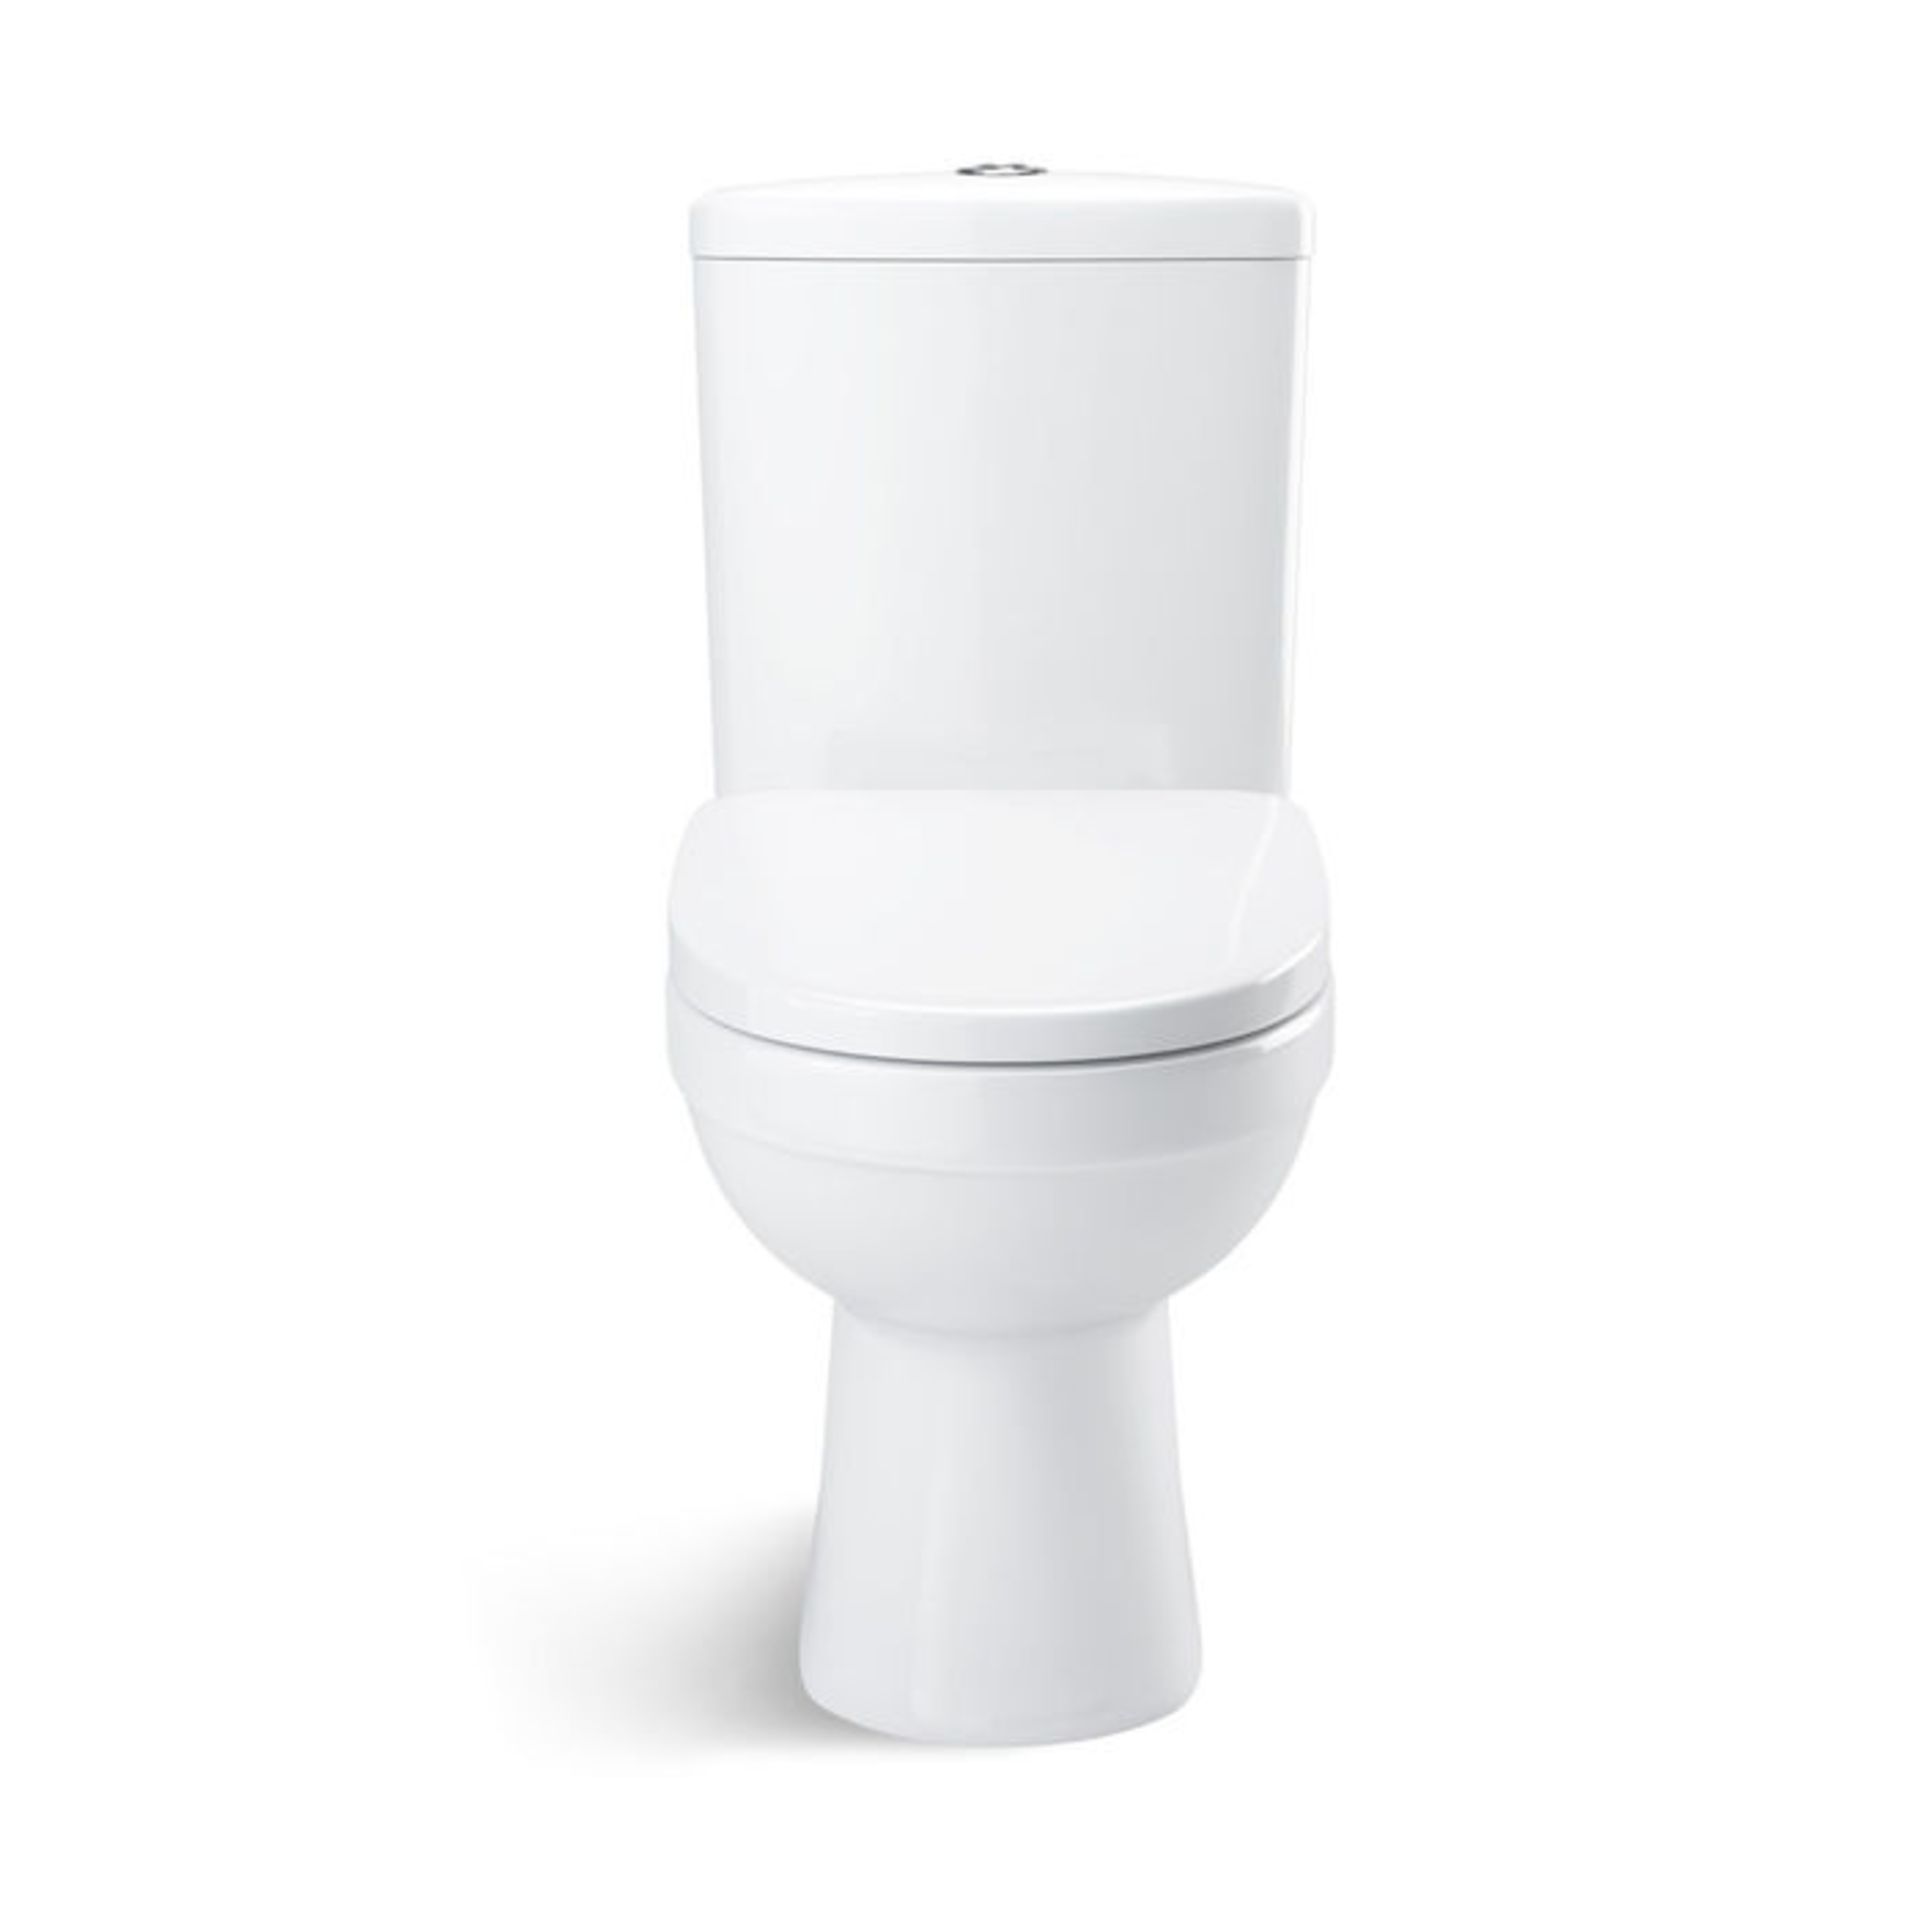 (AL180) Sabrosa II Close Coupled Toilet & Cistern inc Soft Close Seat. Made from White Vitreous - Image 3 of 4